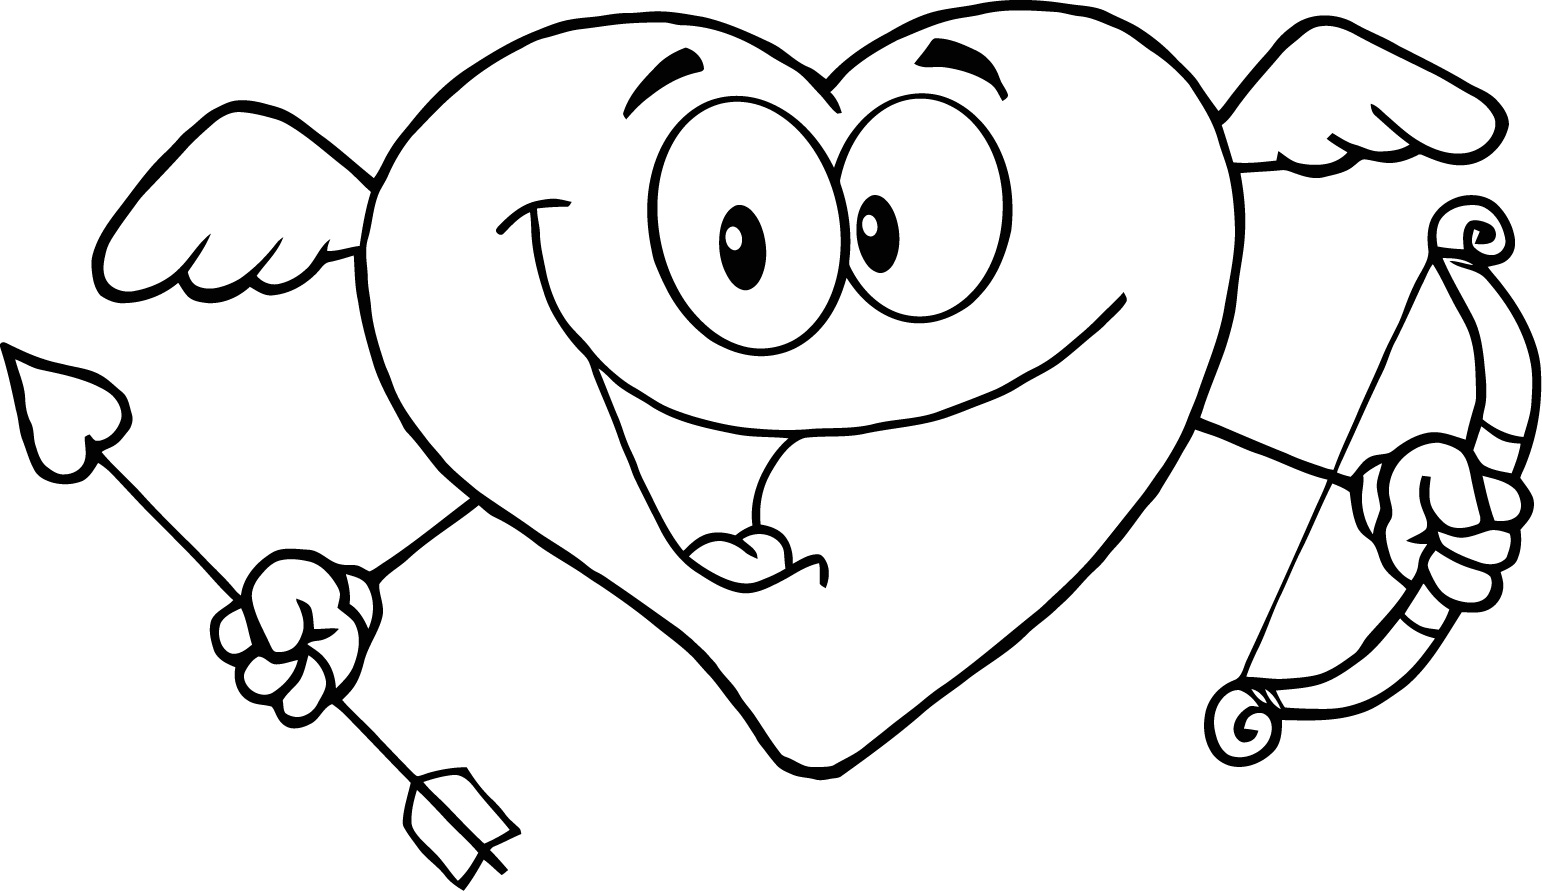 570  Cute Coloring Pages For Your Boyfriend  Latest Free